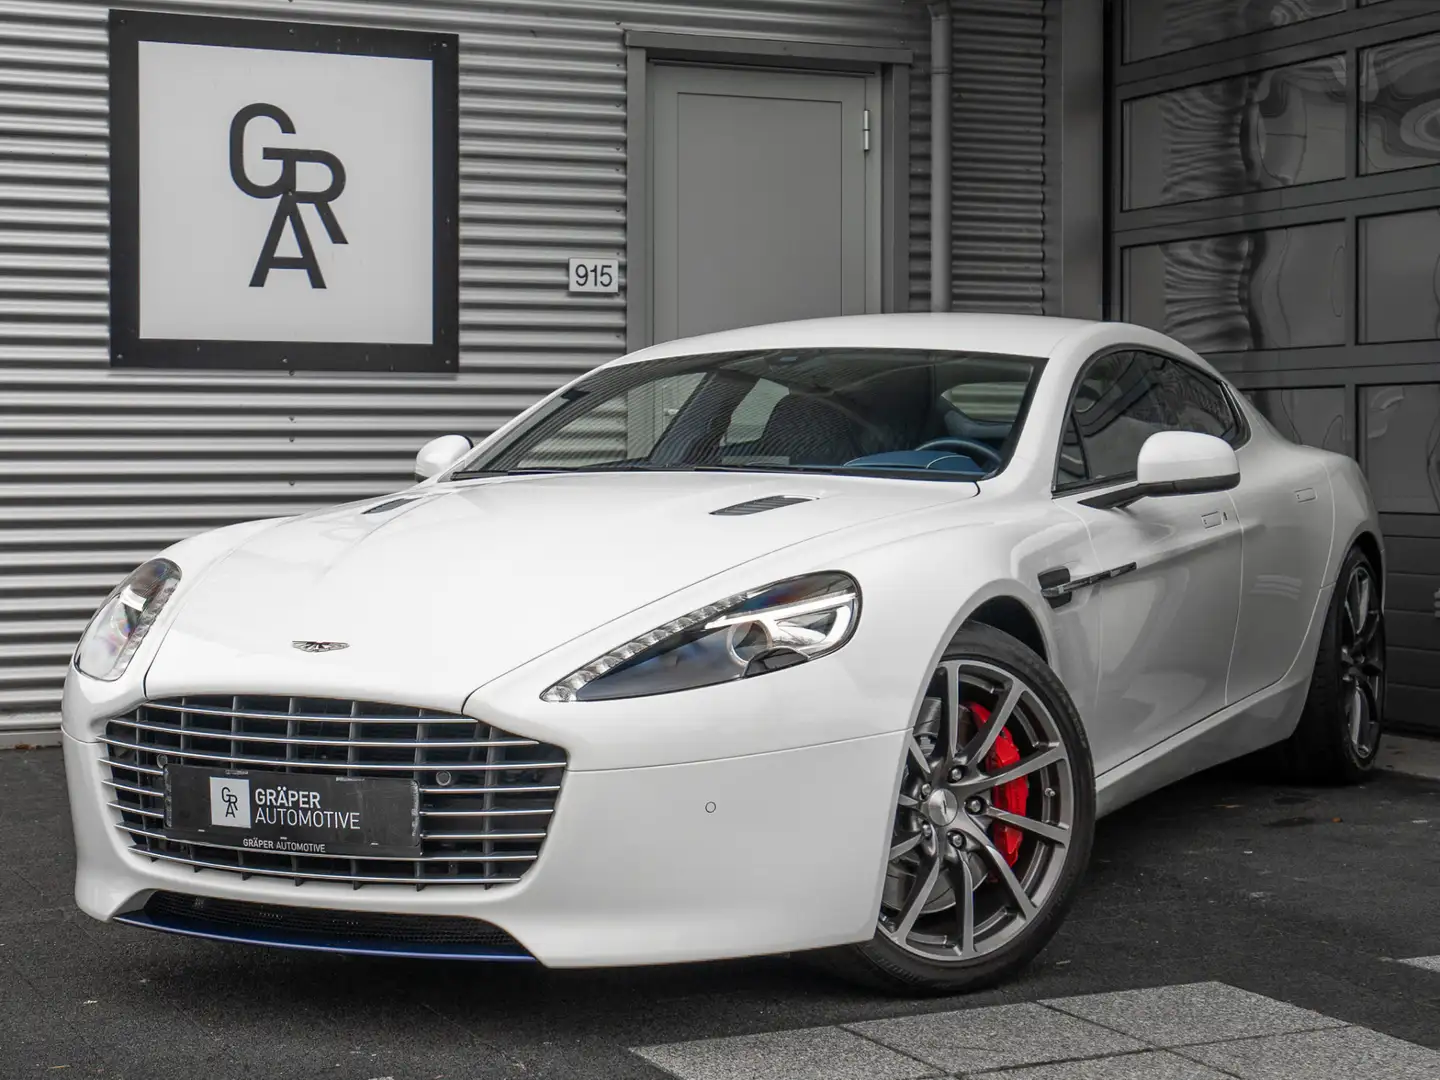 Aston Martin Rapide S 6.0 V12 ‘Britain is Great’ Edition by Q 1/8 Biały - 1